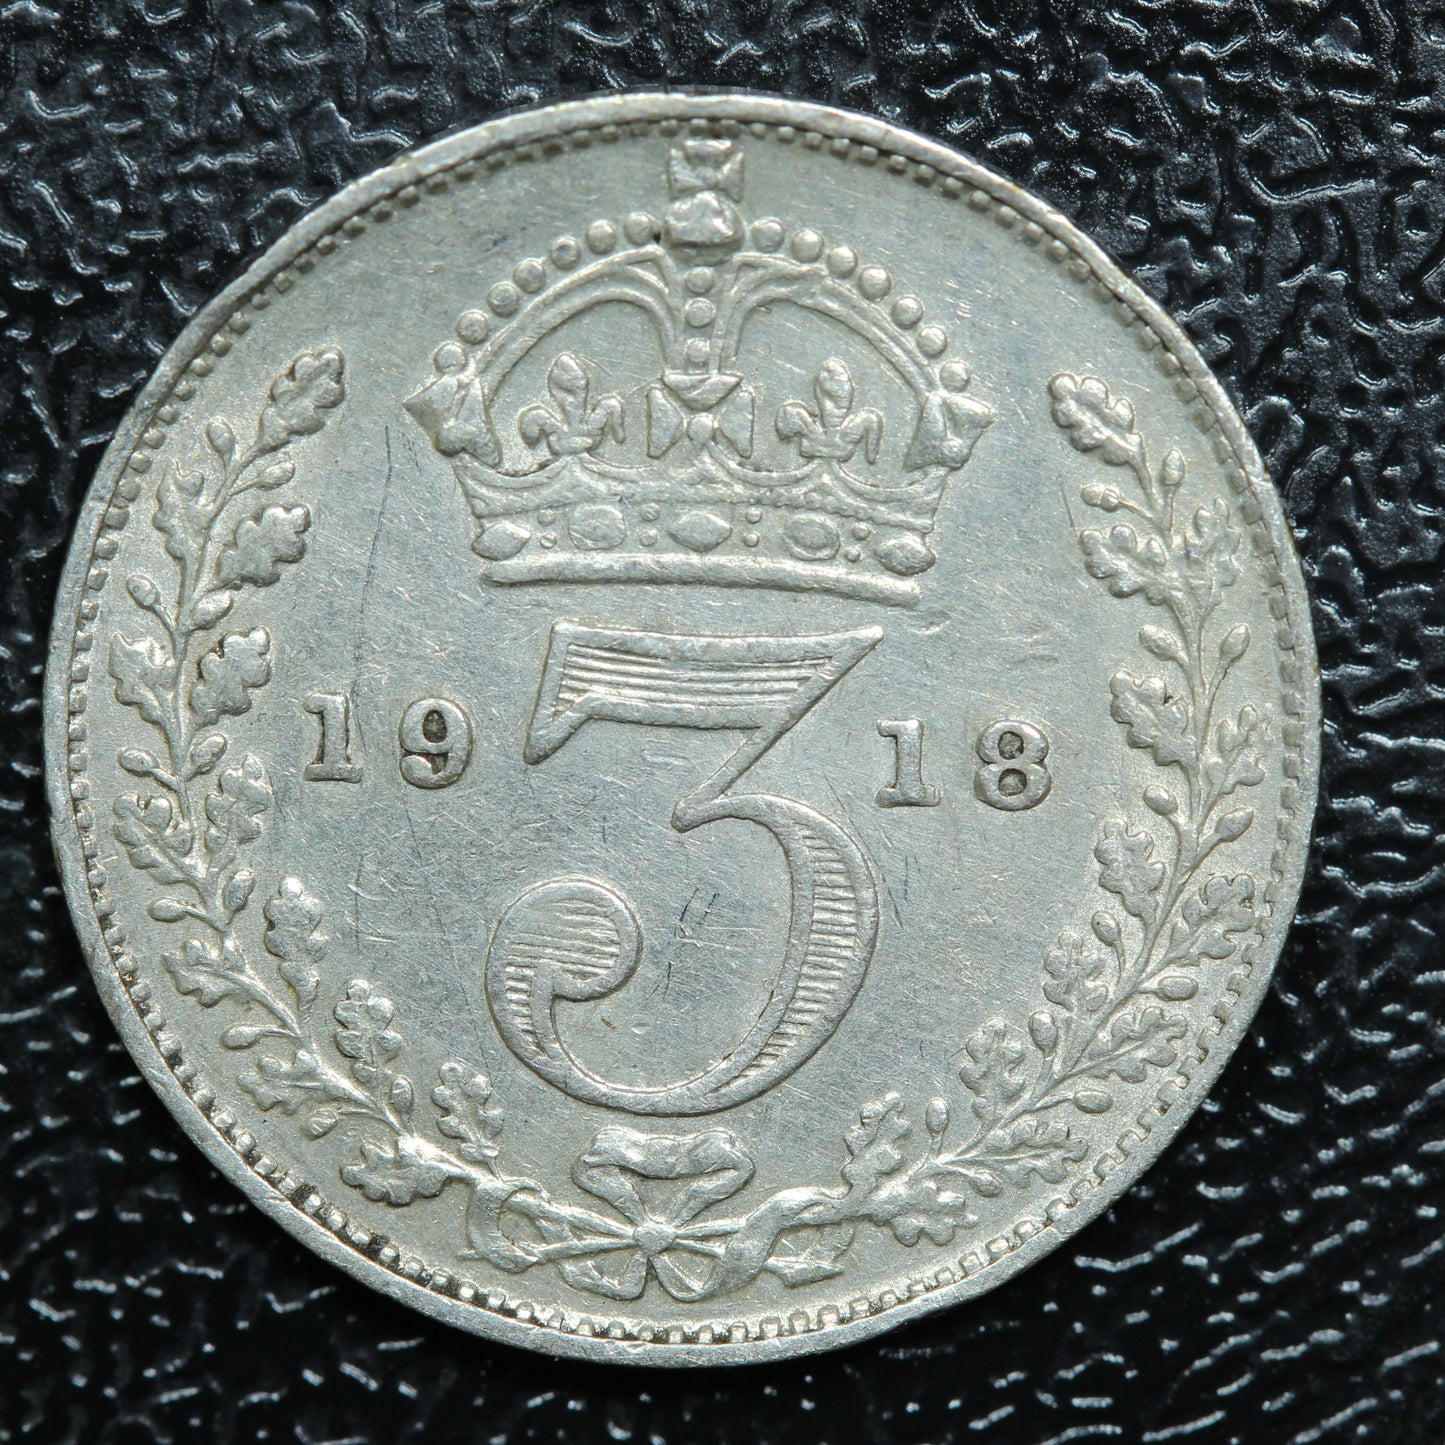 1918 Great Britain 3 Pence Threepence Silver Coin - KM# 813